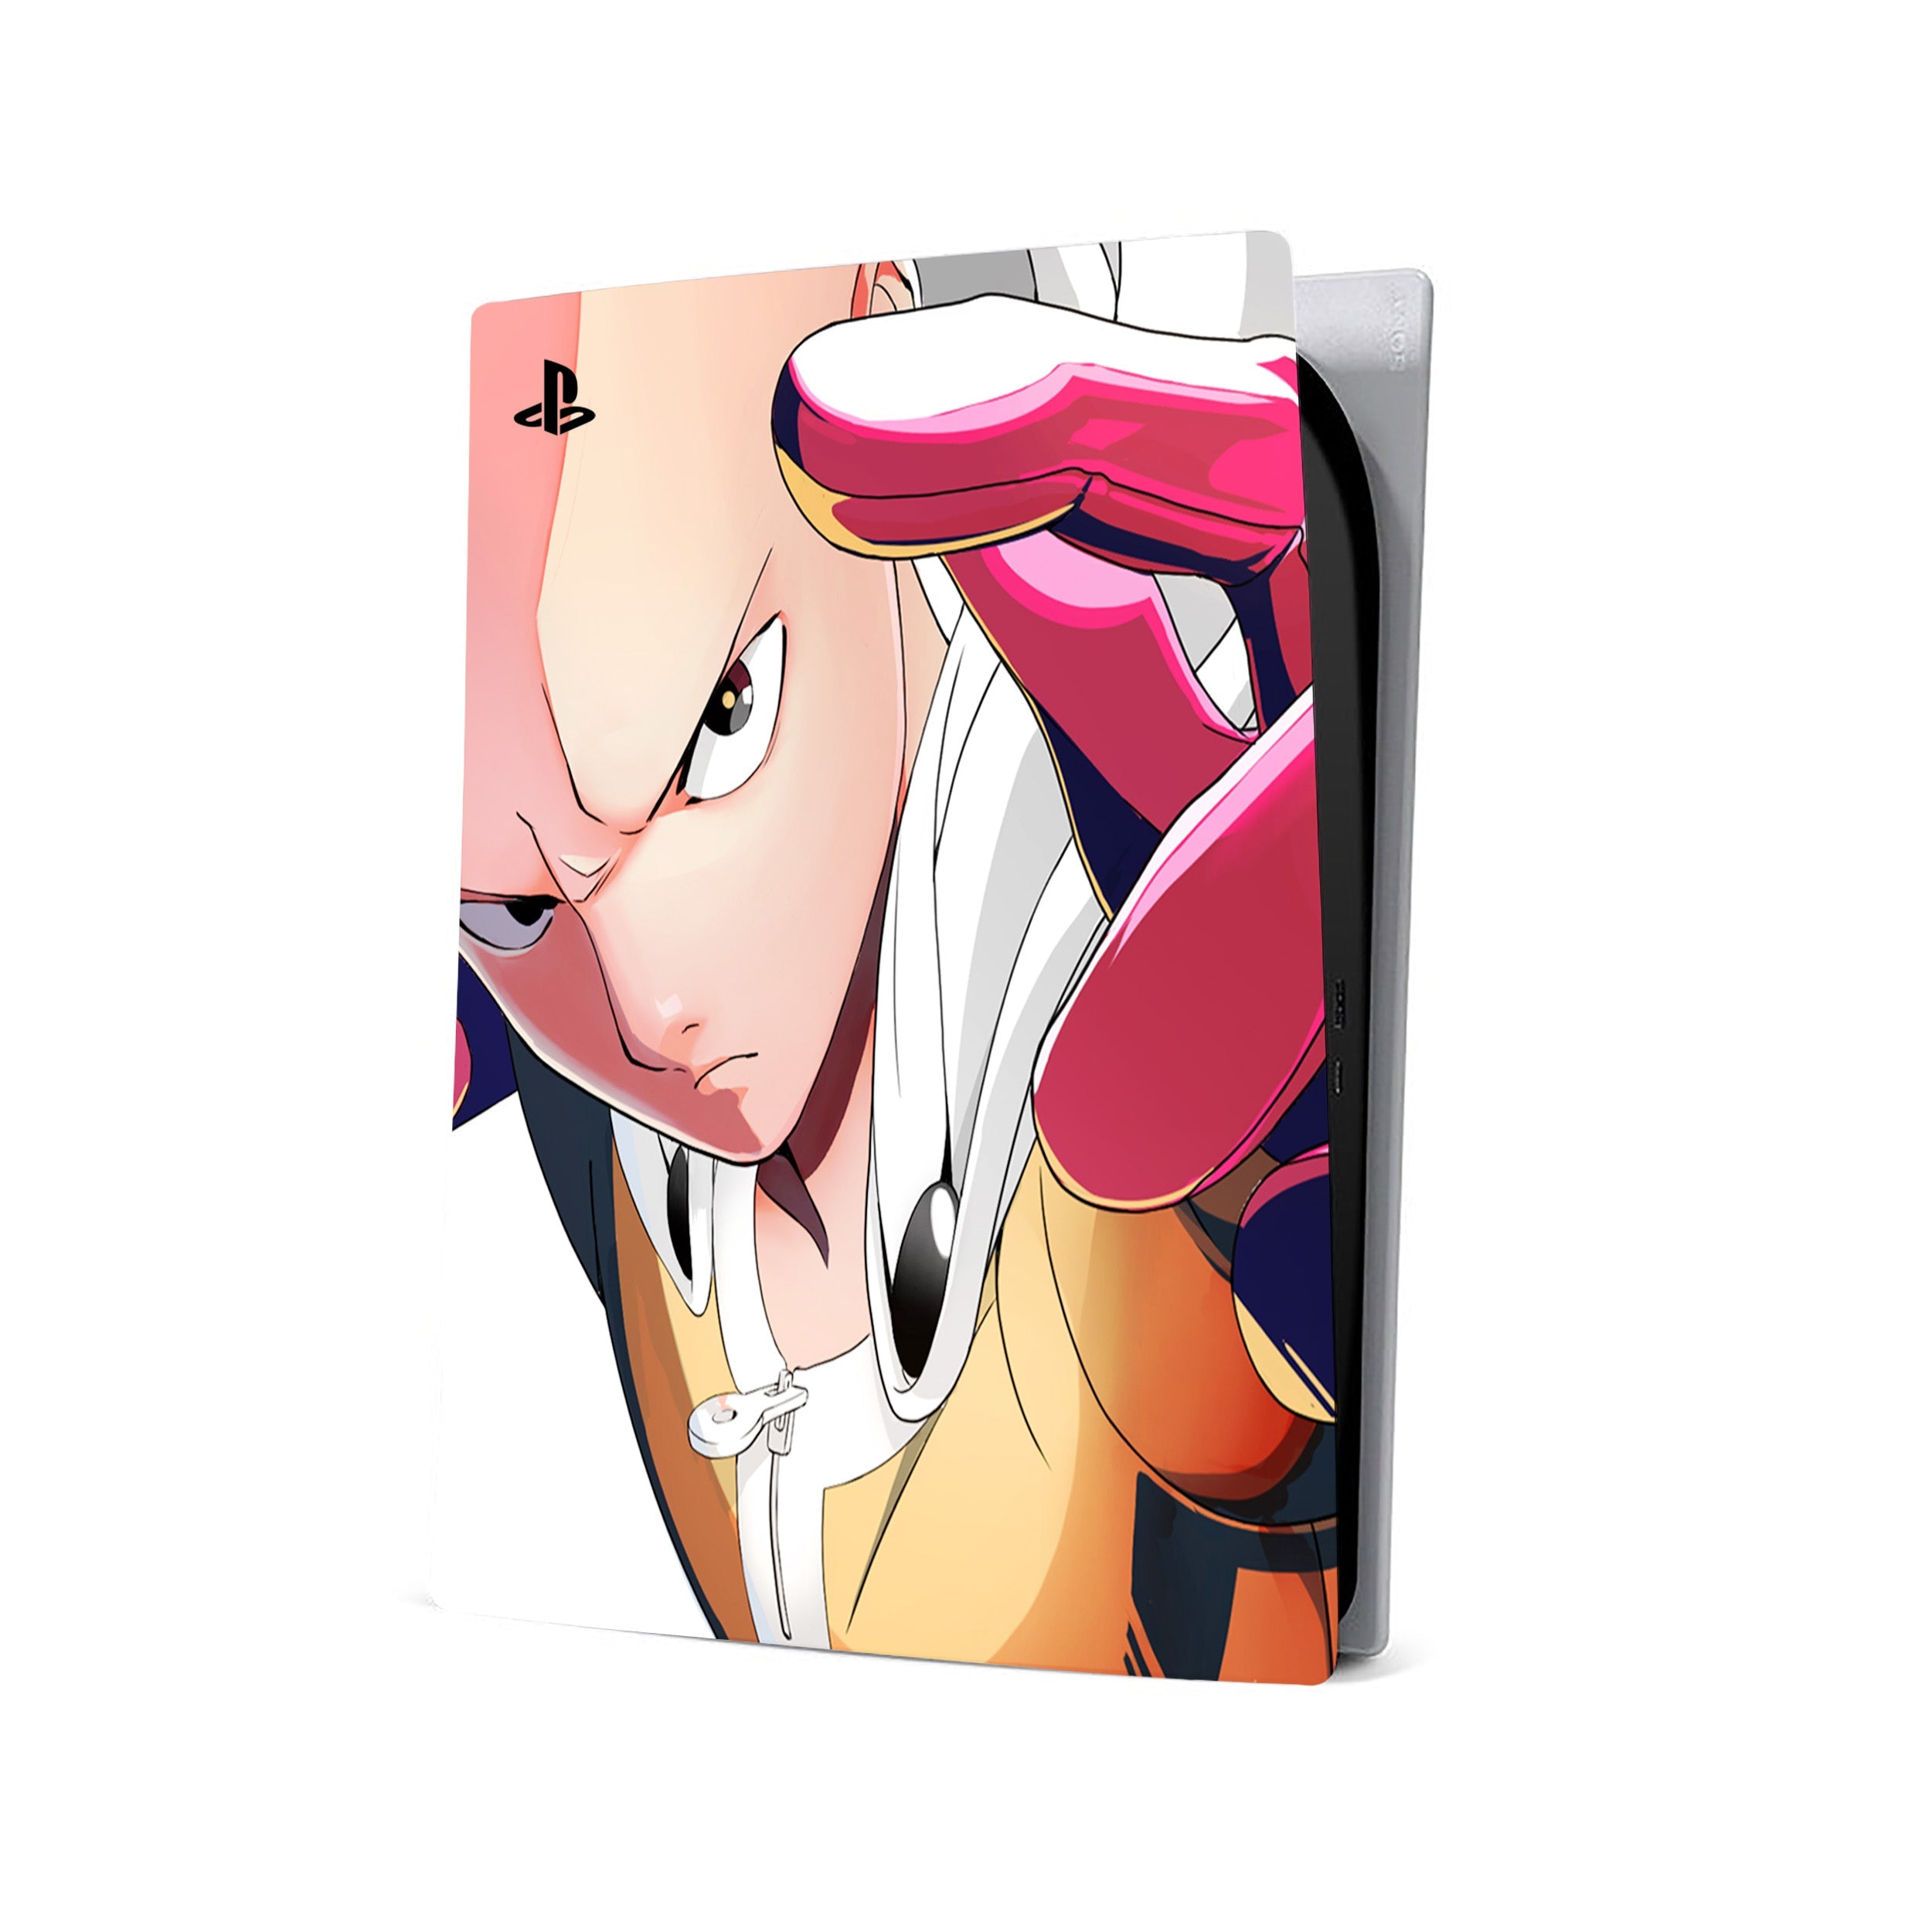 A video game skin featuring a One Punch Man Saitama design for the PS5.